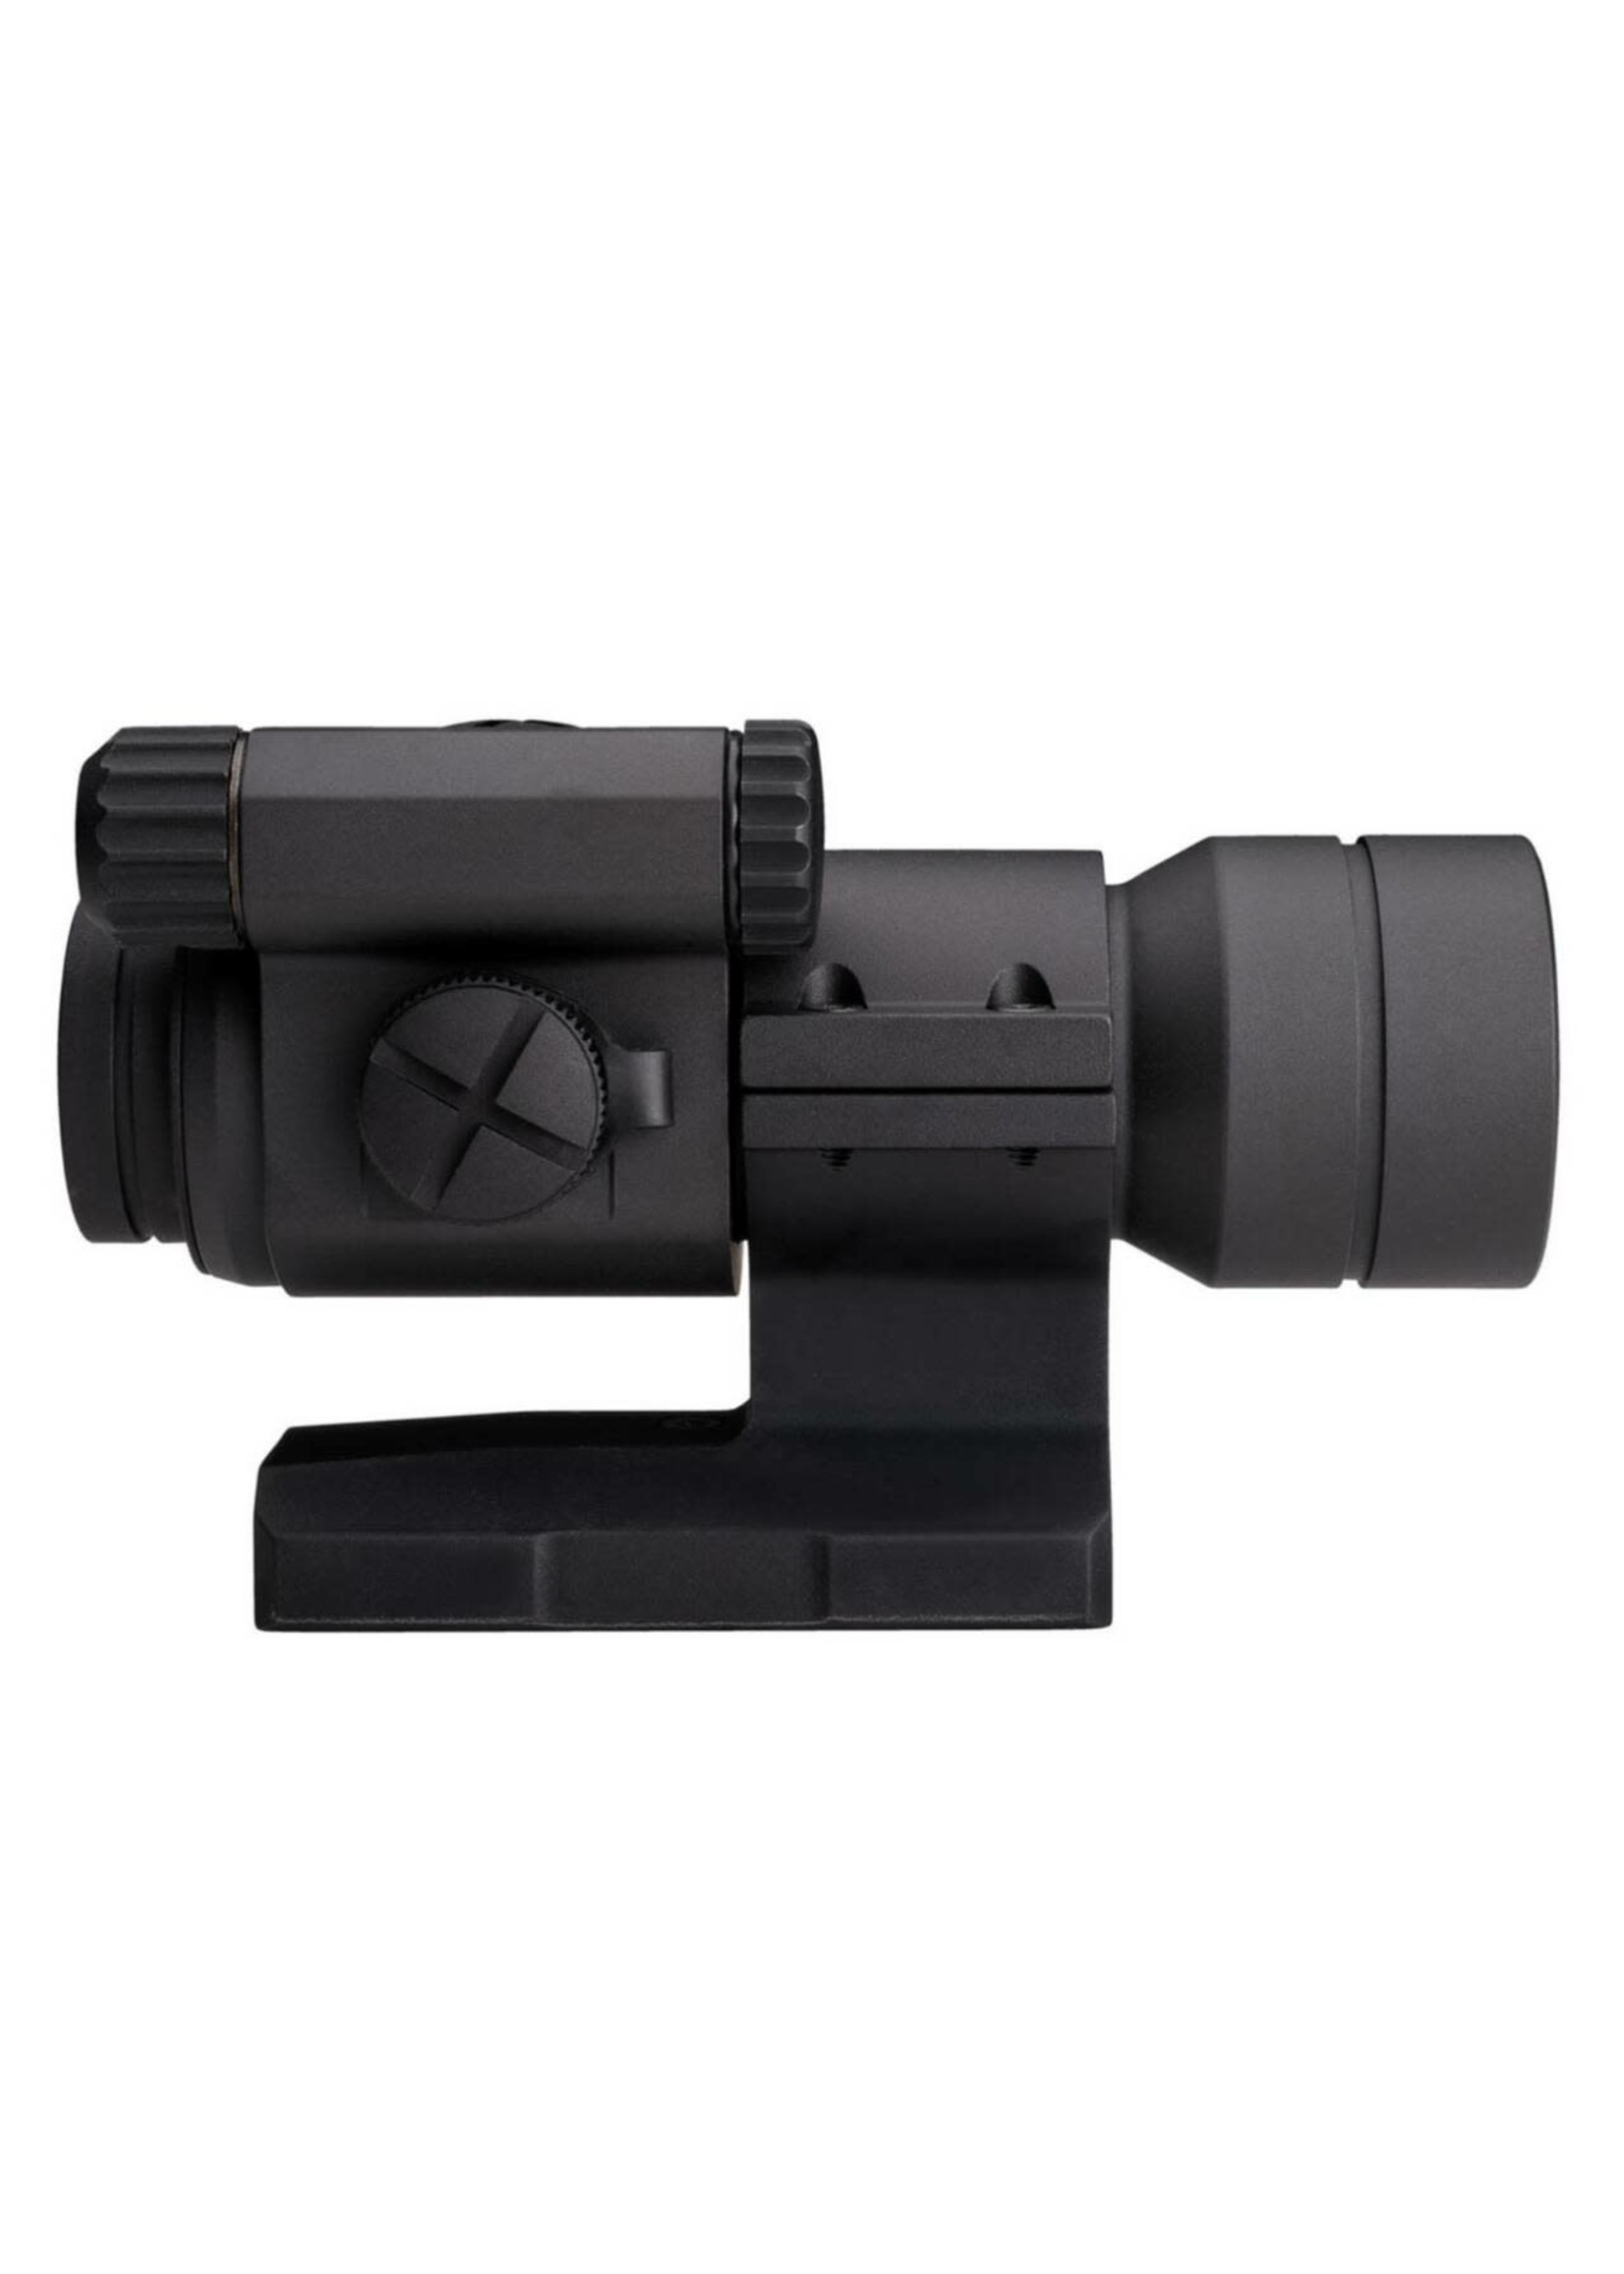 AIMPOINT AIMPOINT AIMPOINT CARBINE OPTIC (ACO) AR15-READY, TNP MOUNT/39MM SPACER